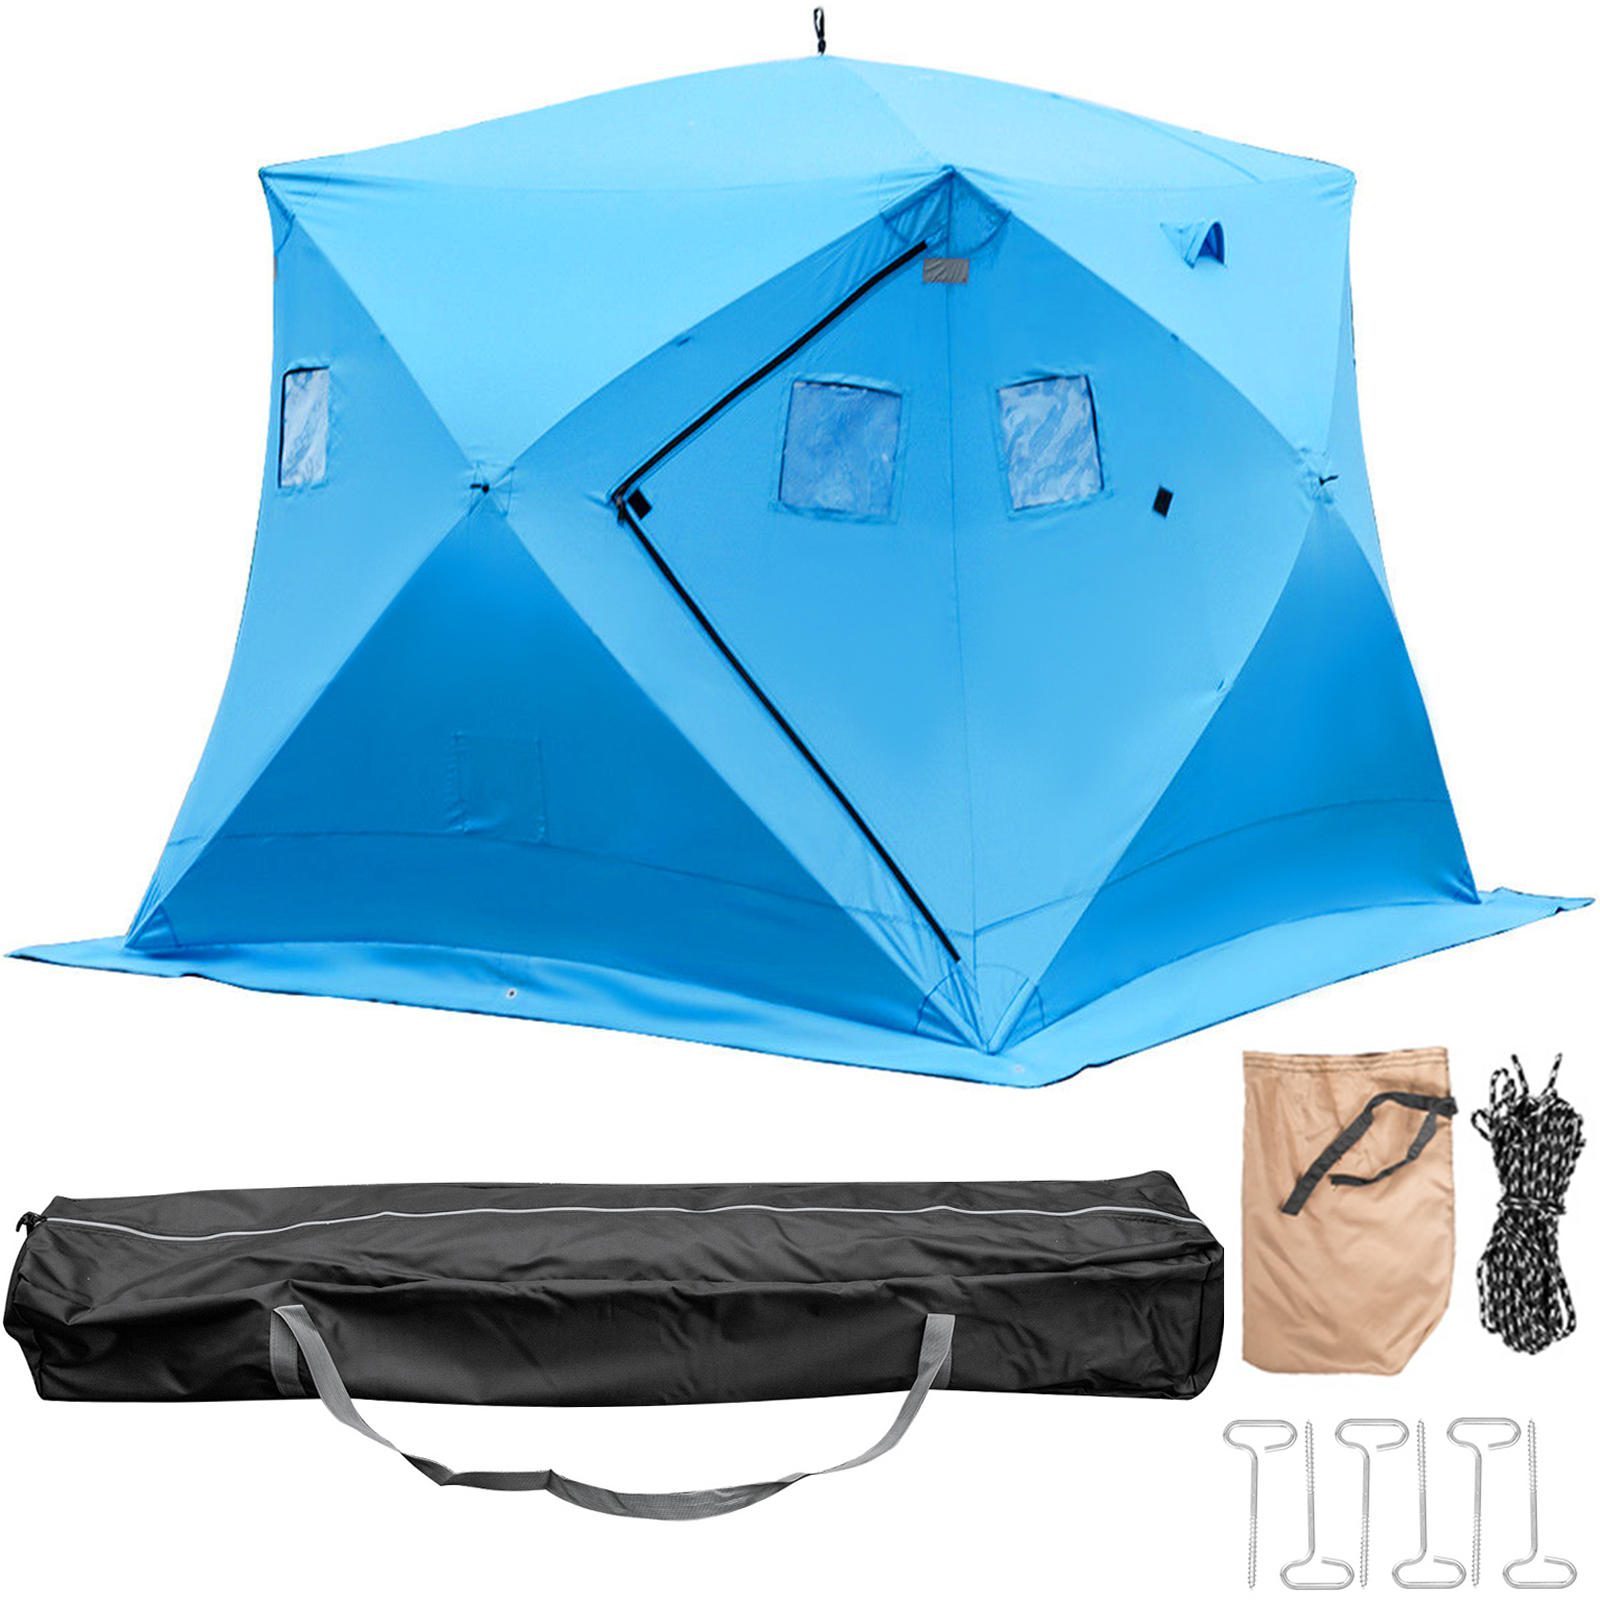 Ice Shelter Fishing Tent 4-person Waterproof Pop-up Shanty W/ Carrying Bag от Vevor Many GEOs